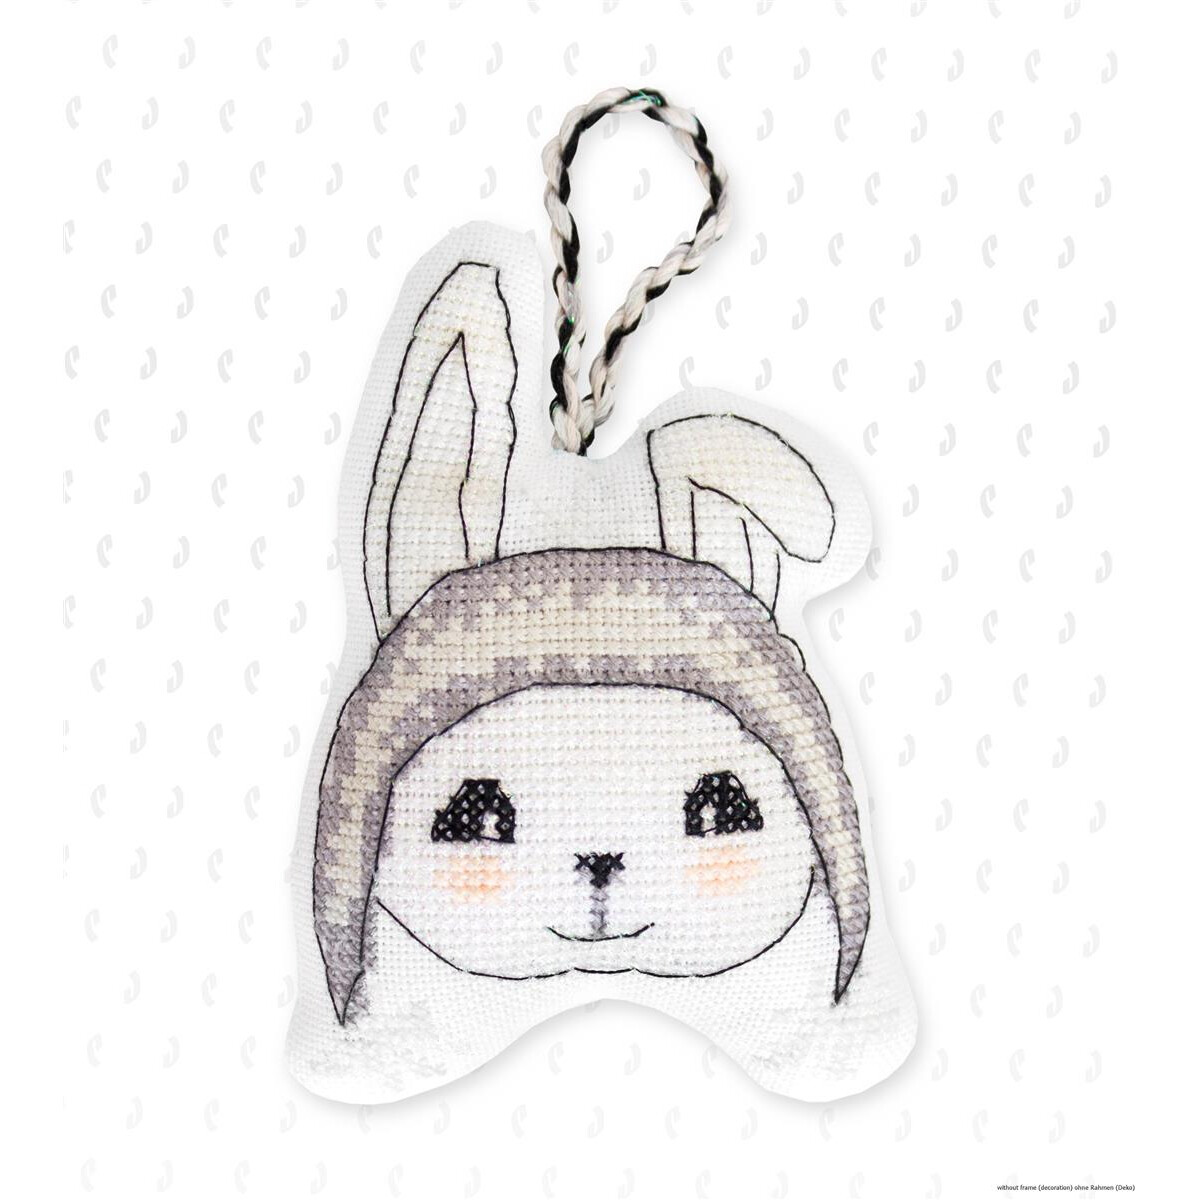 Luca-S counted Cross Stitch kit Toy "Bunny",...